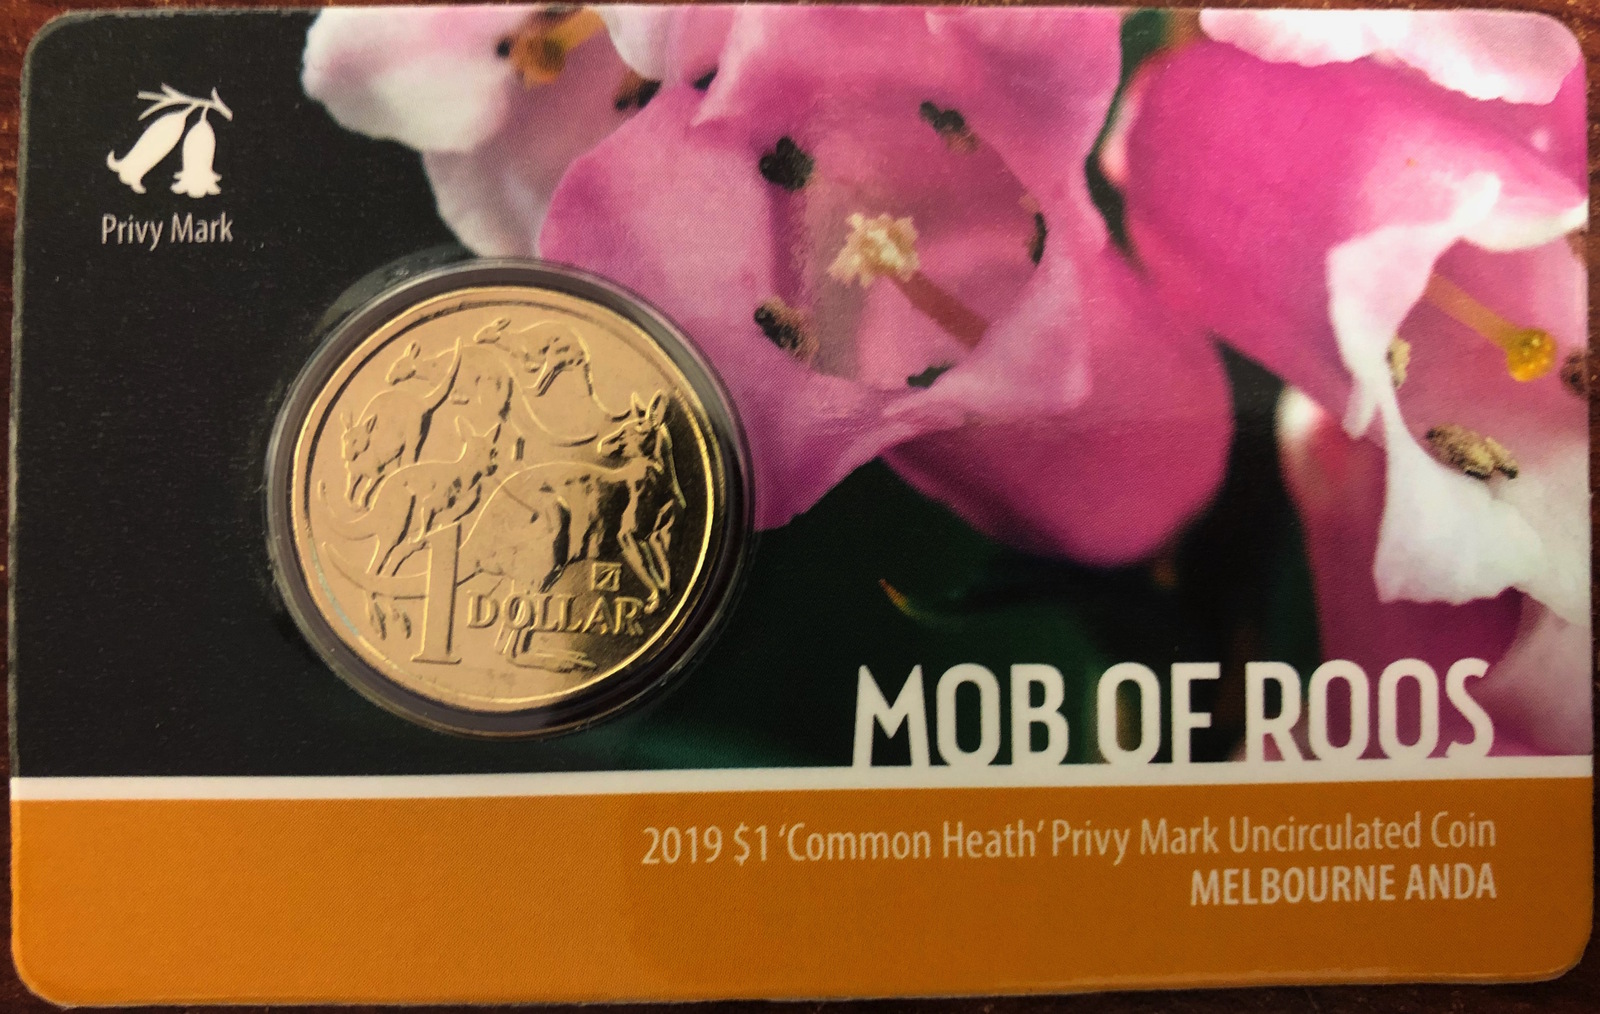 One Dollar Uncirculated In Card 2019 Melbourne Money Expo Privy Mark product image